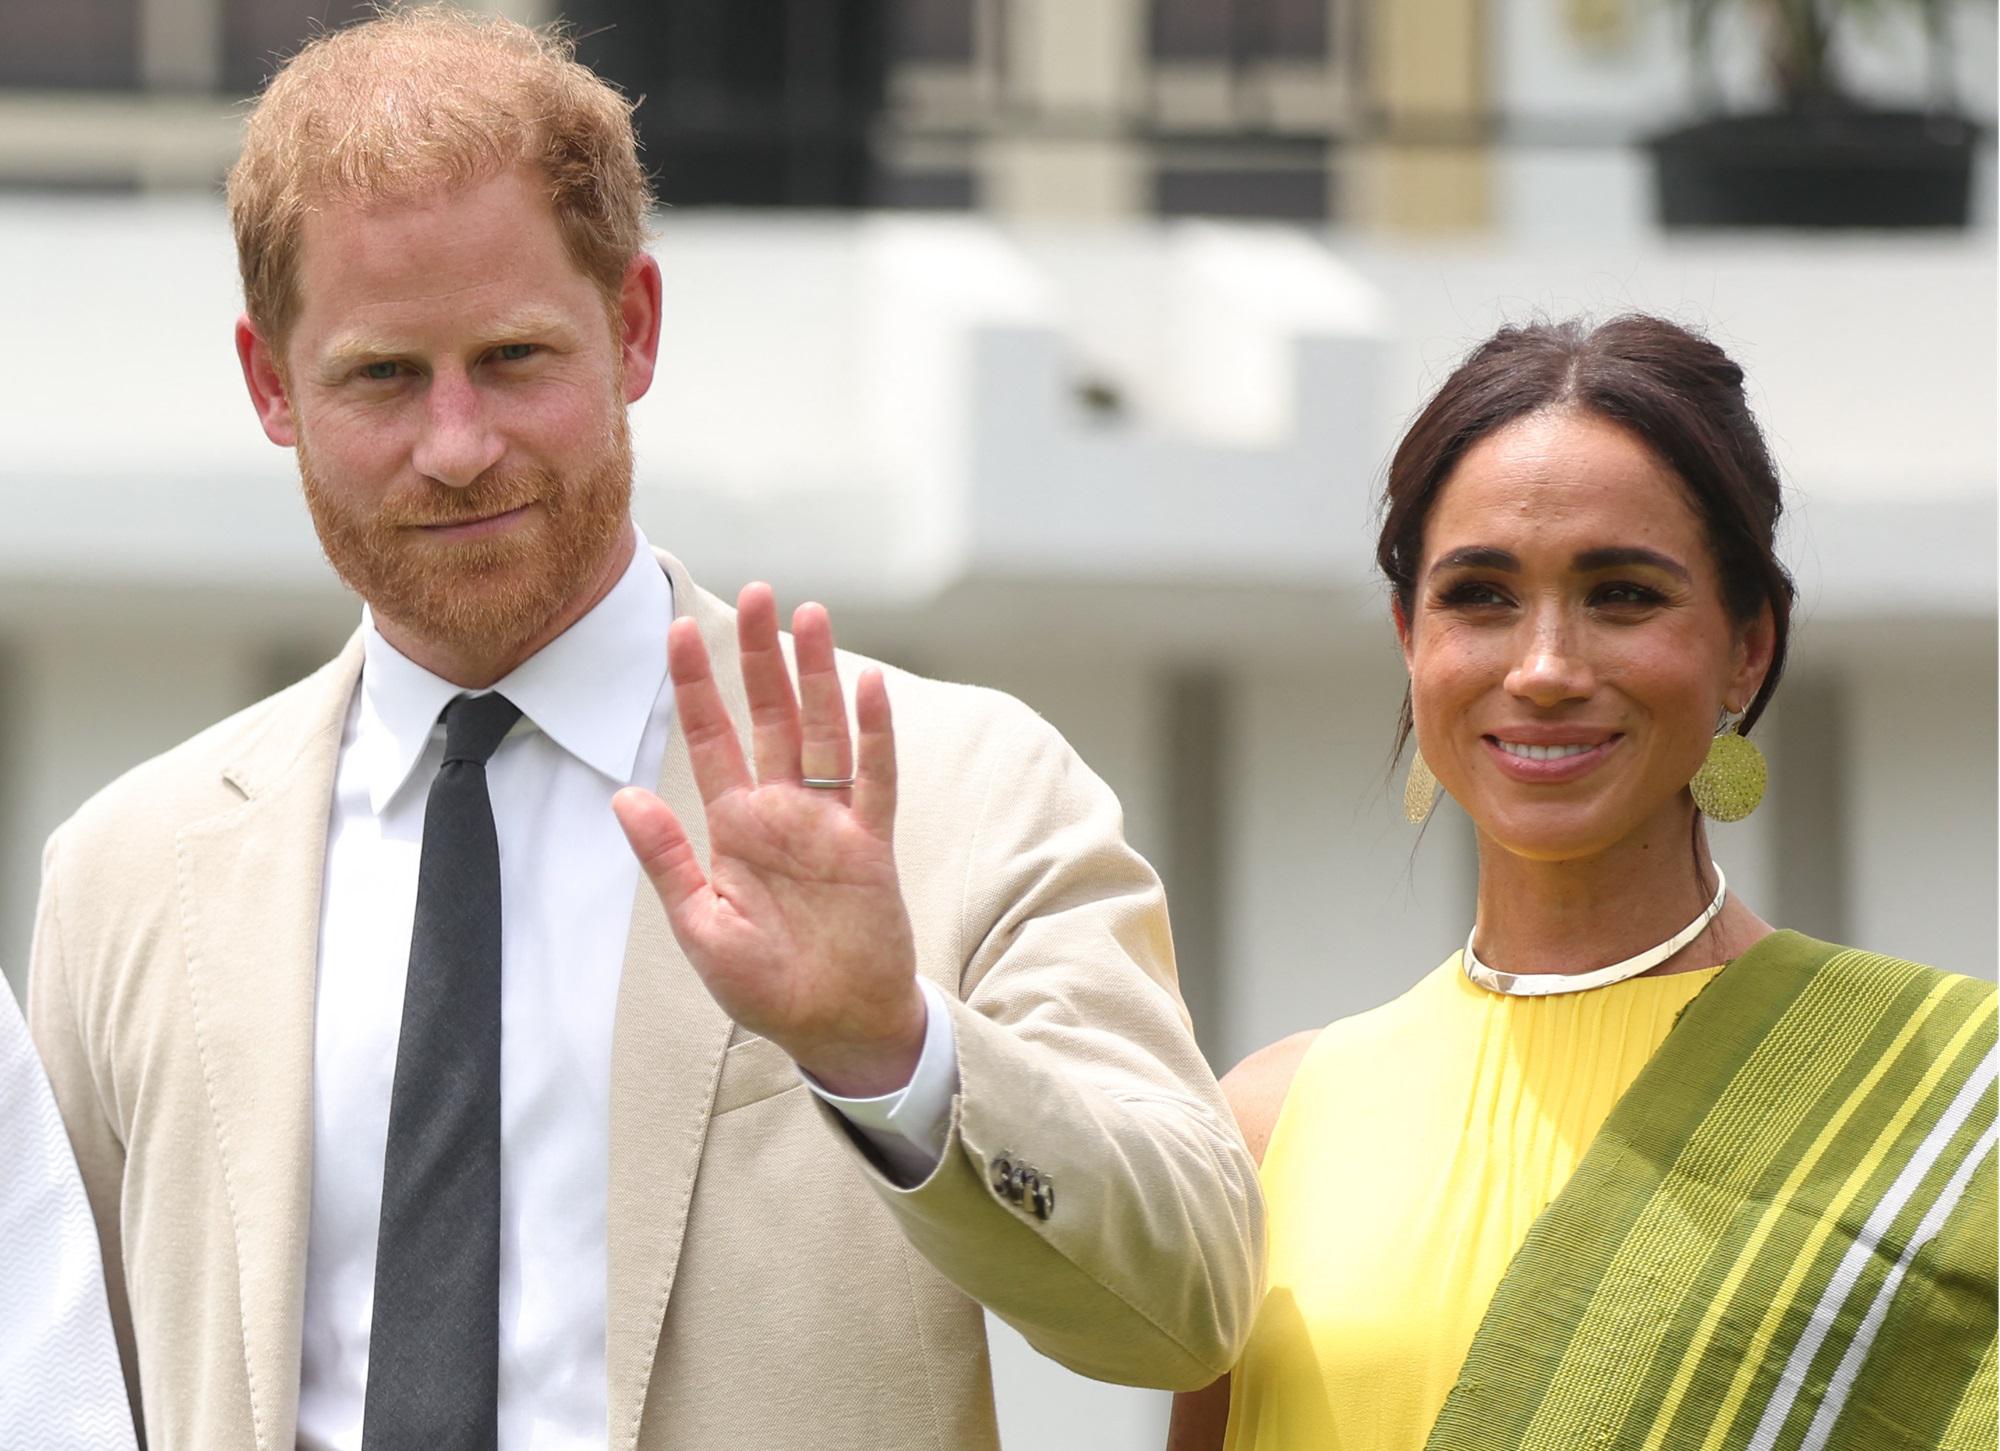 Harry and Meghan face trouble as Archewell foundation labeled ‘non-compliant’